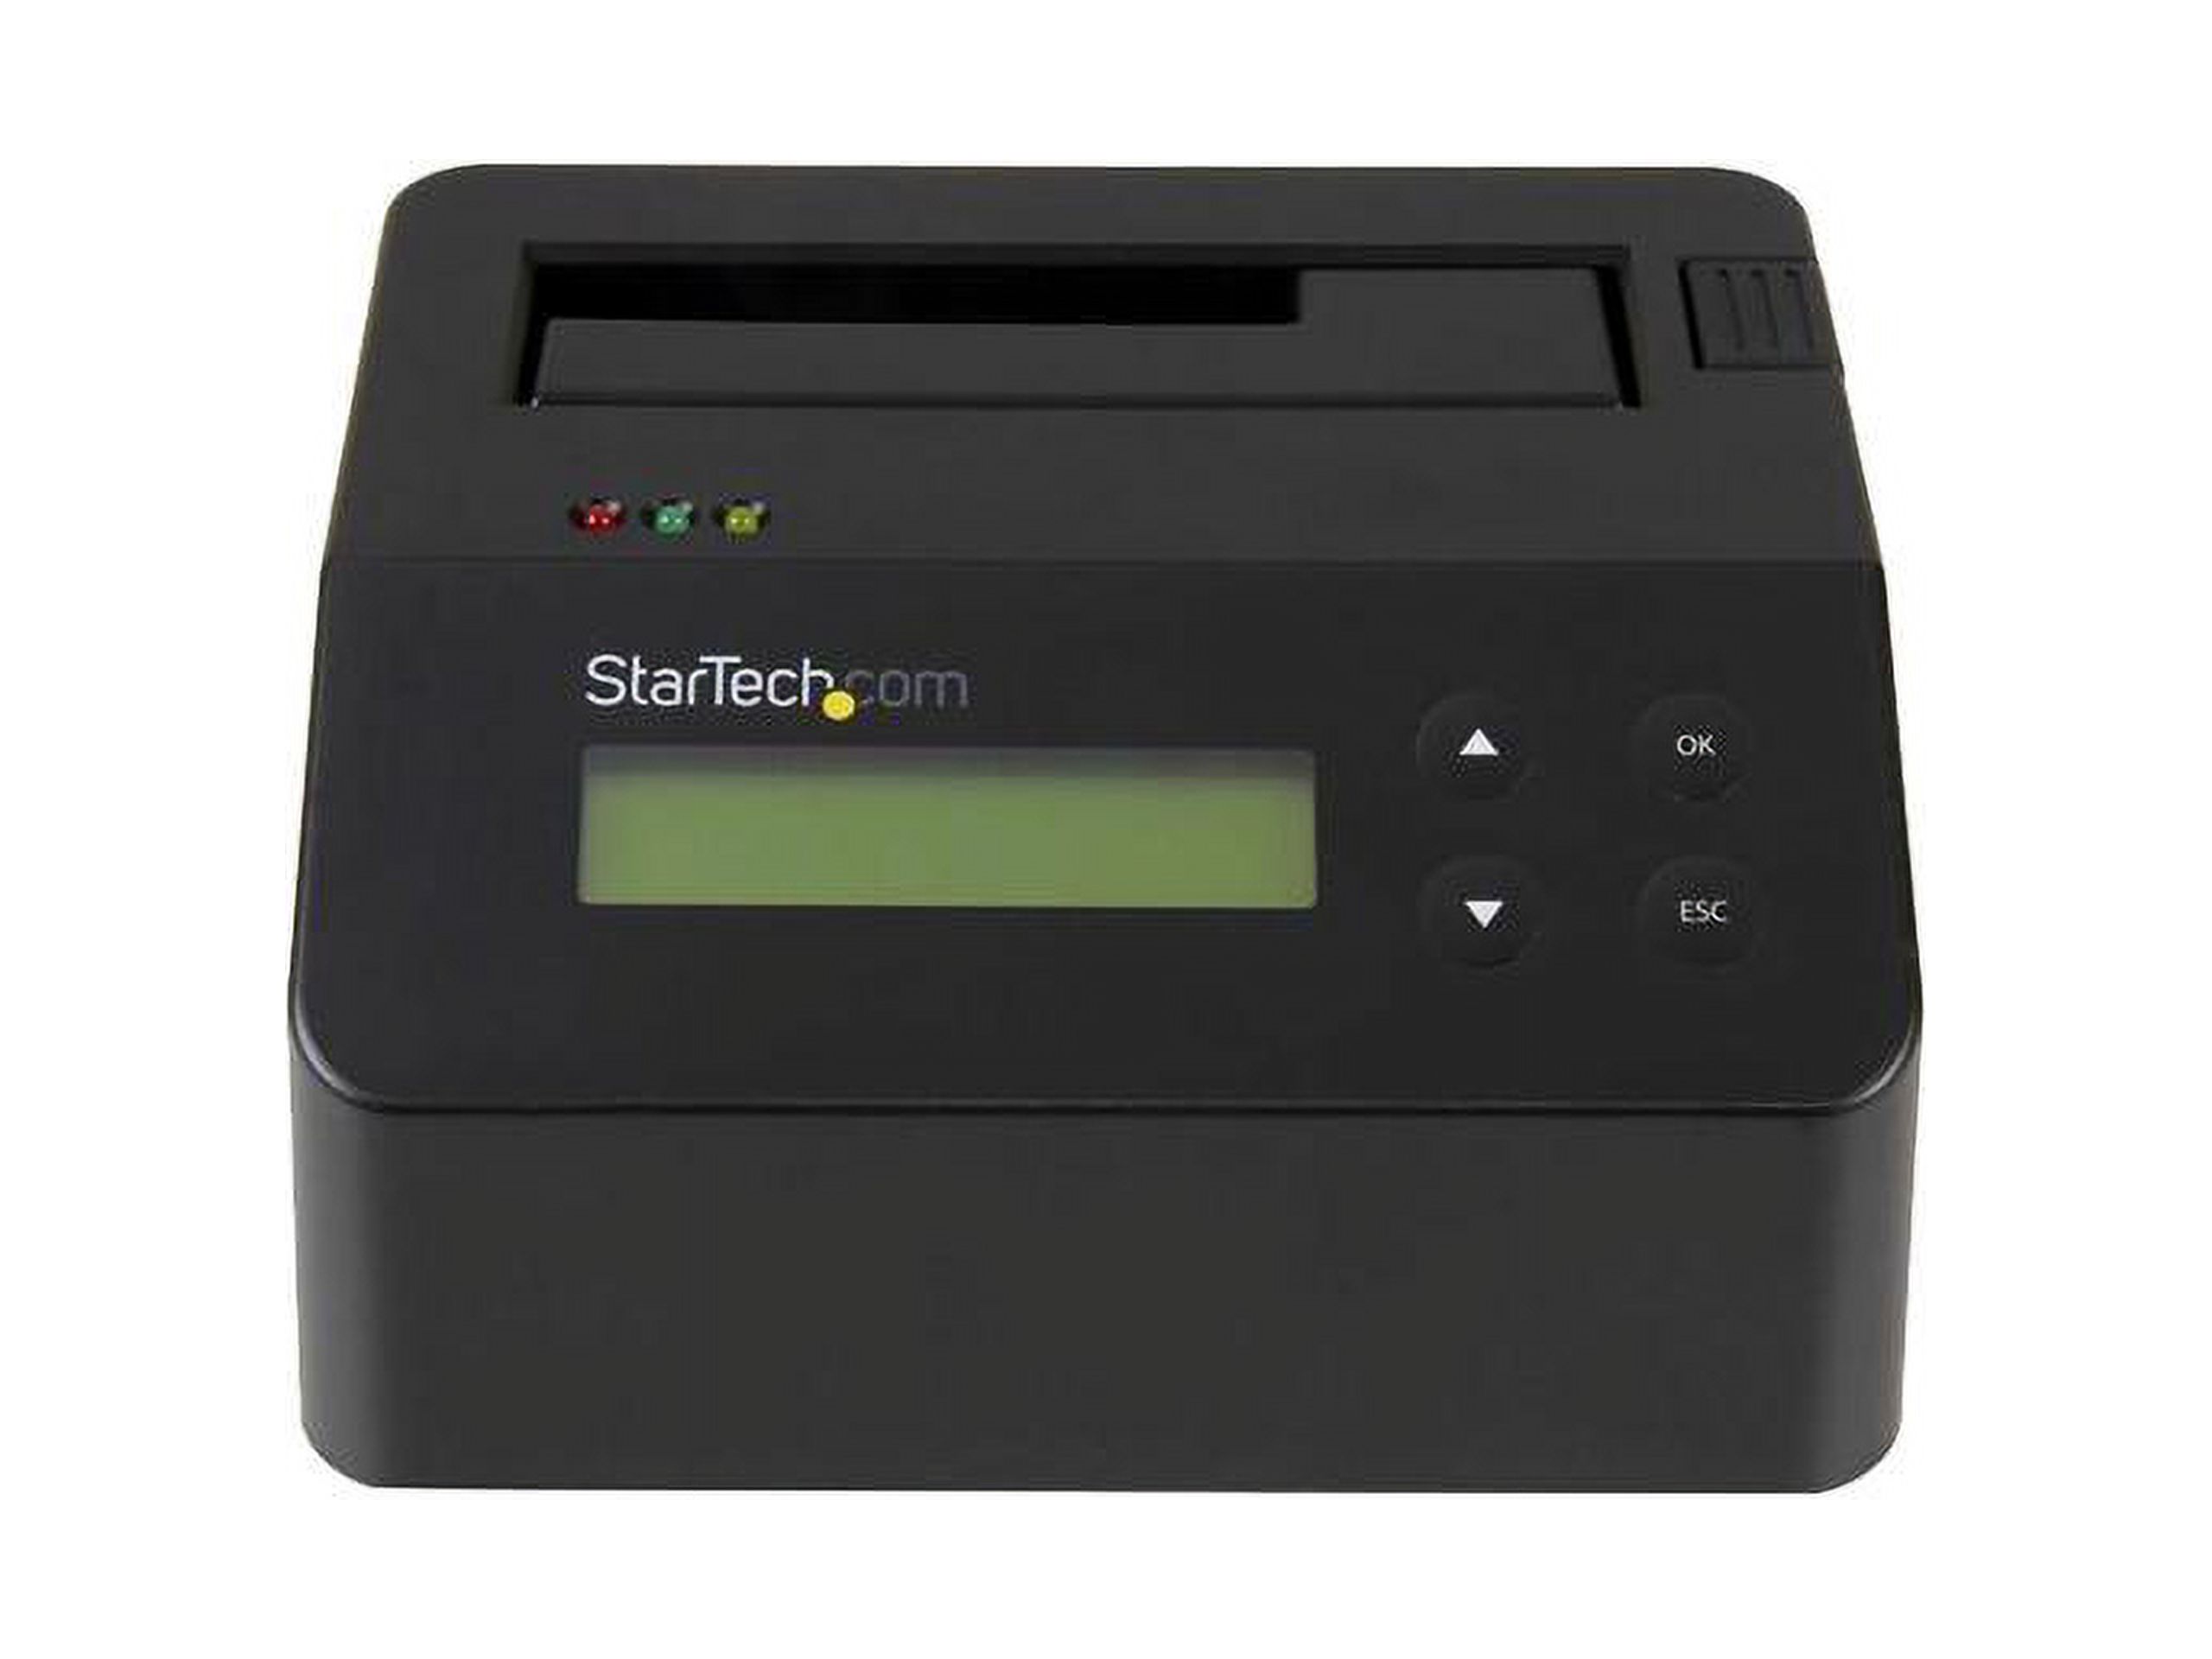 StarTech.com SDOCK1EU3P USB 3.0 Standalone Eraser Dock for 2.5" and 3.5” SATA SSD/HDD Drives - Secure Drive Erase with Receipt Printing - SATA I/II - image 2 of 4